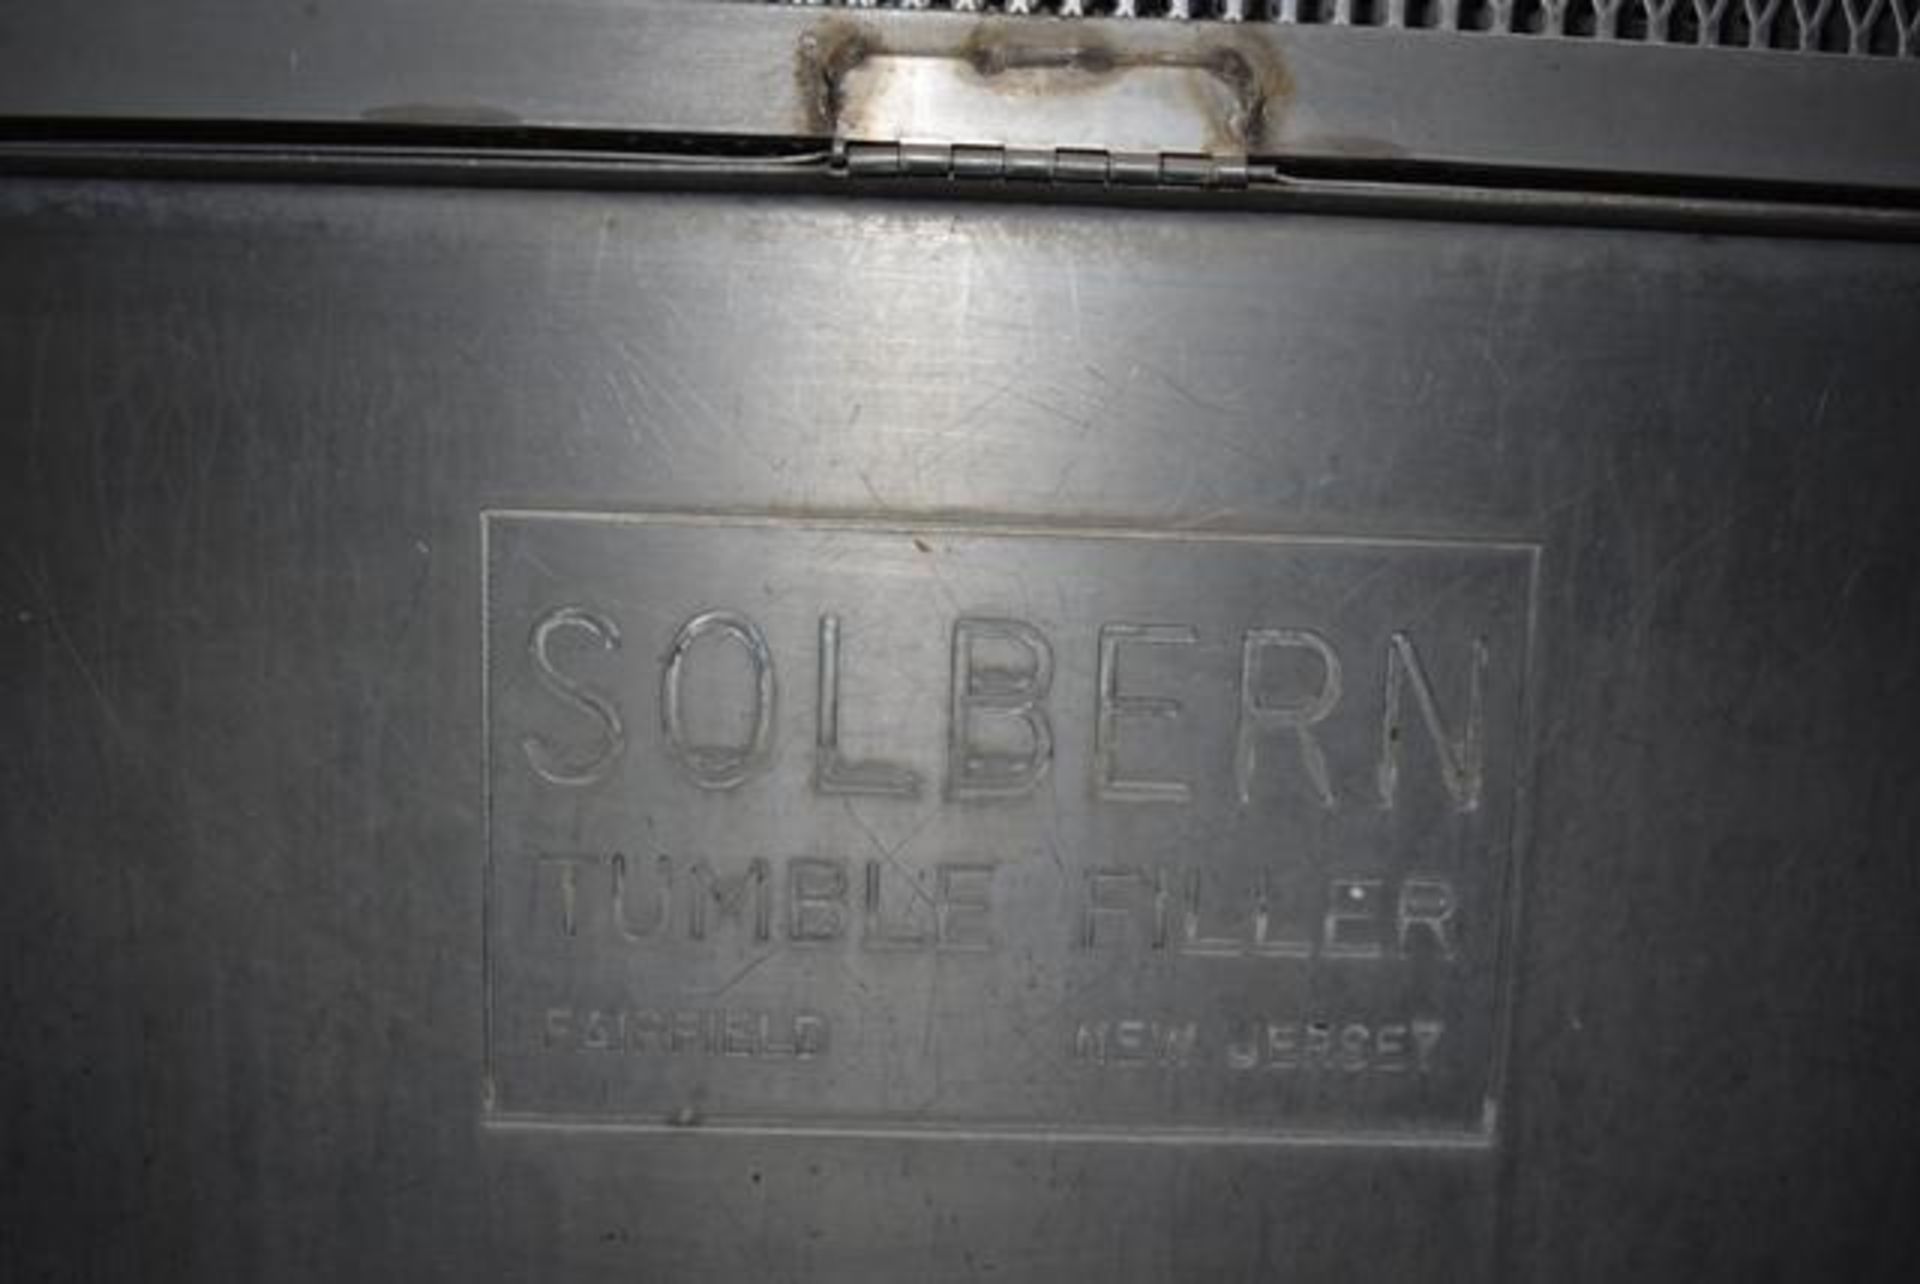 Solbern Tumble Filler, Size 603 x 700 Can, Line CL, RIGGING FEE $750 - Image 3 of 4